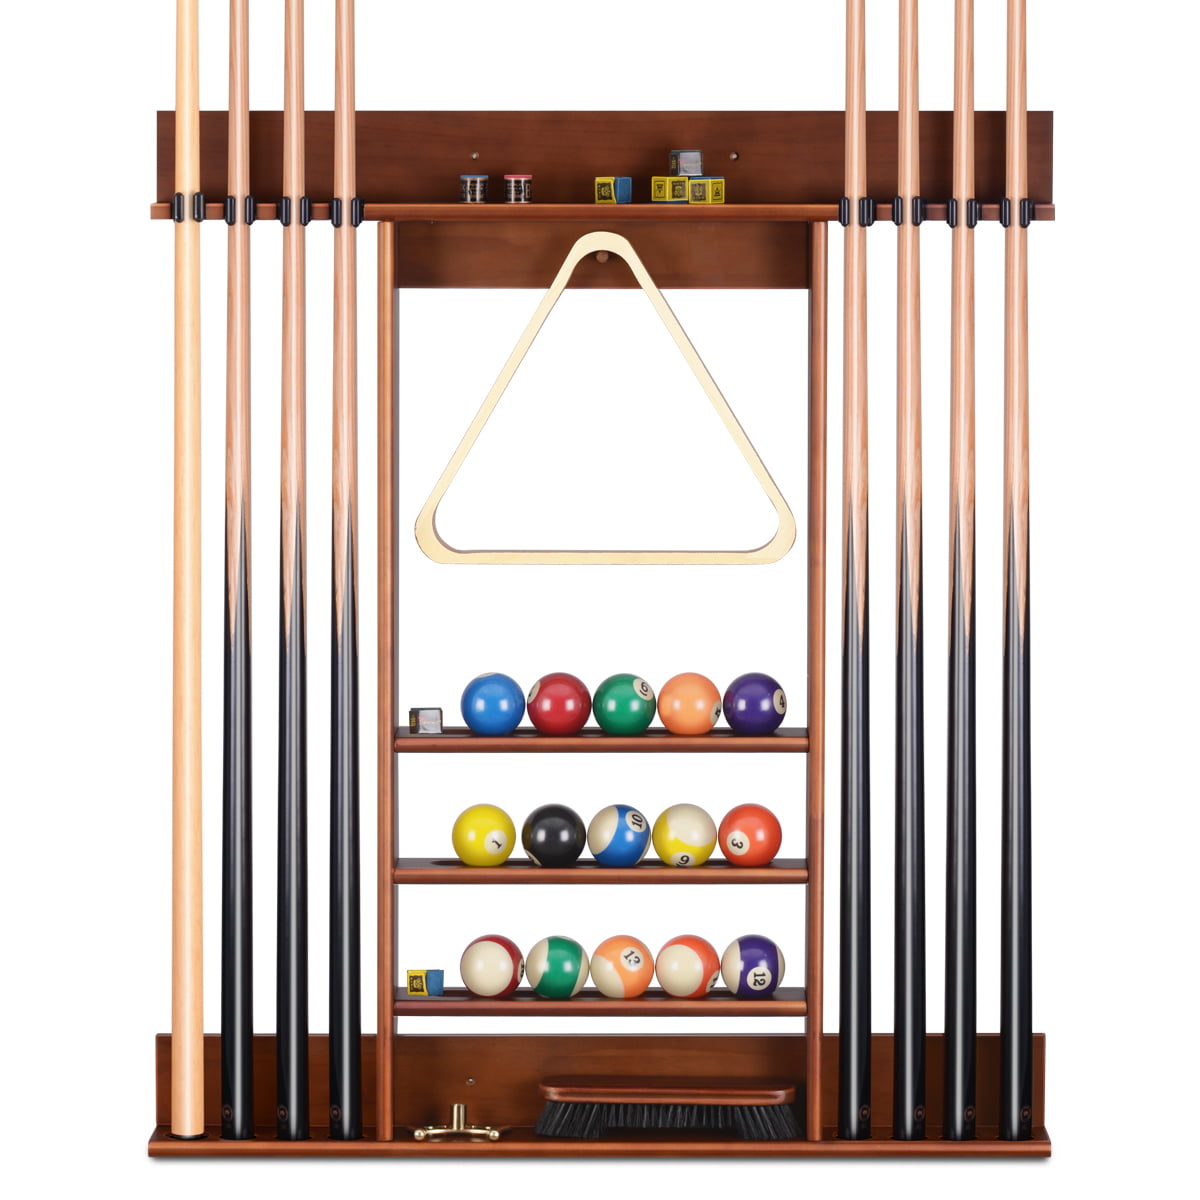 DURABLE POOL/ SNOOKER CUE RACK HOLDS 6 CUES BILLIARD RODS PLASTIC RUBBER 